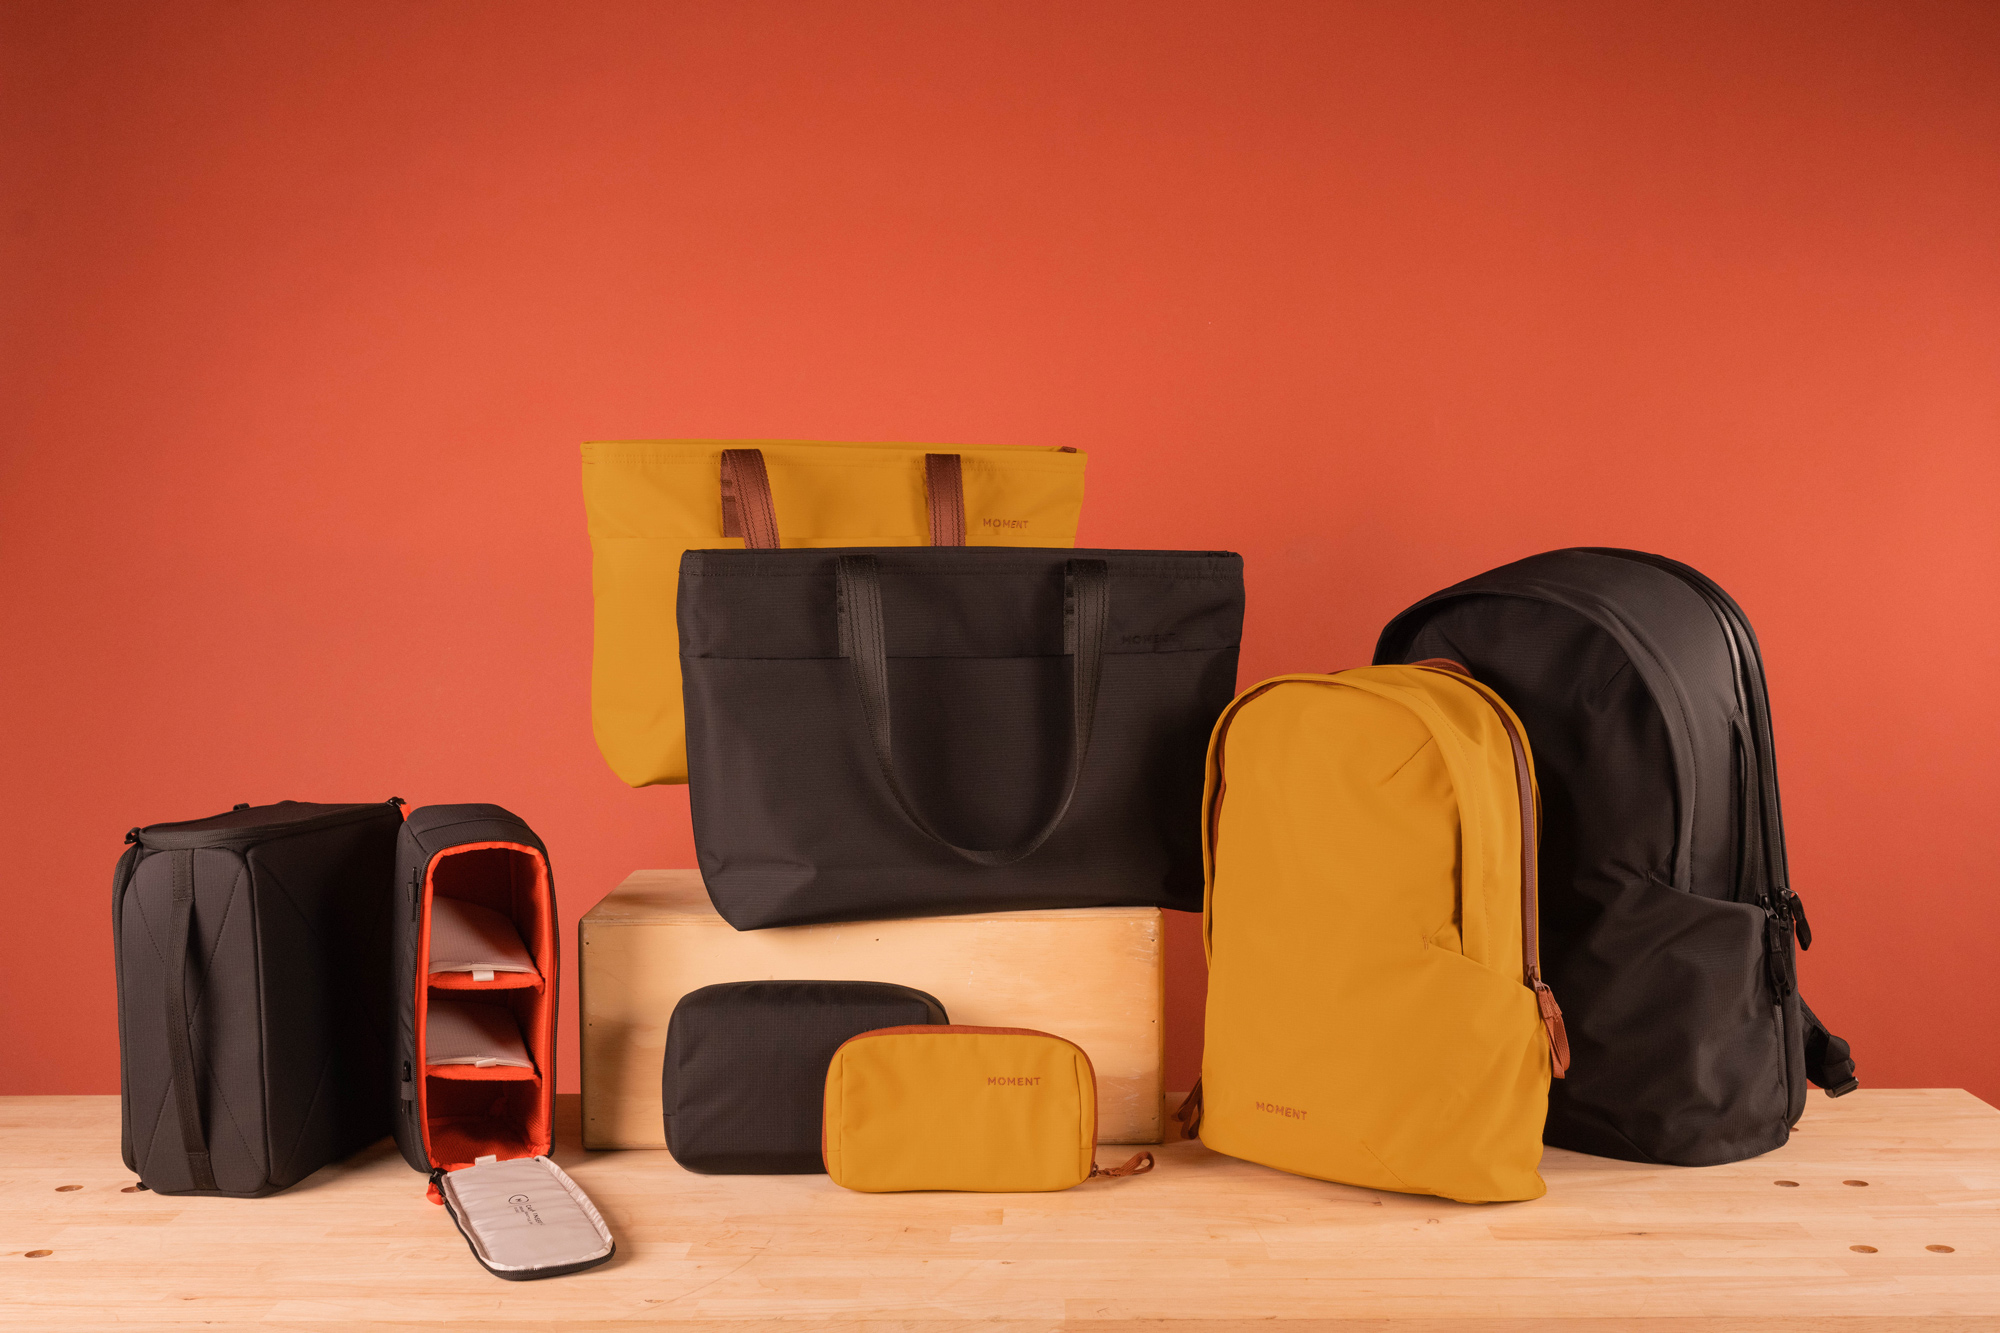 The Moment Everything Bags are versatile daily carry and travel bags